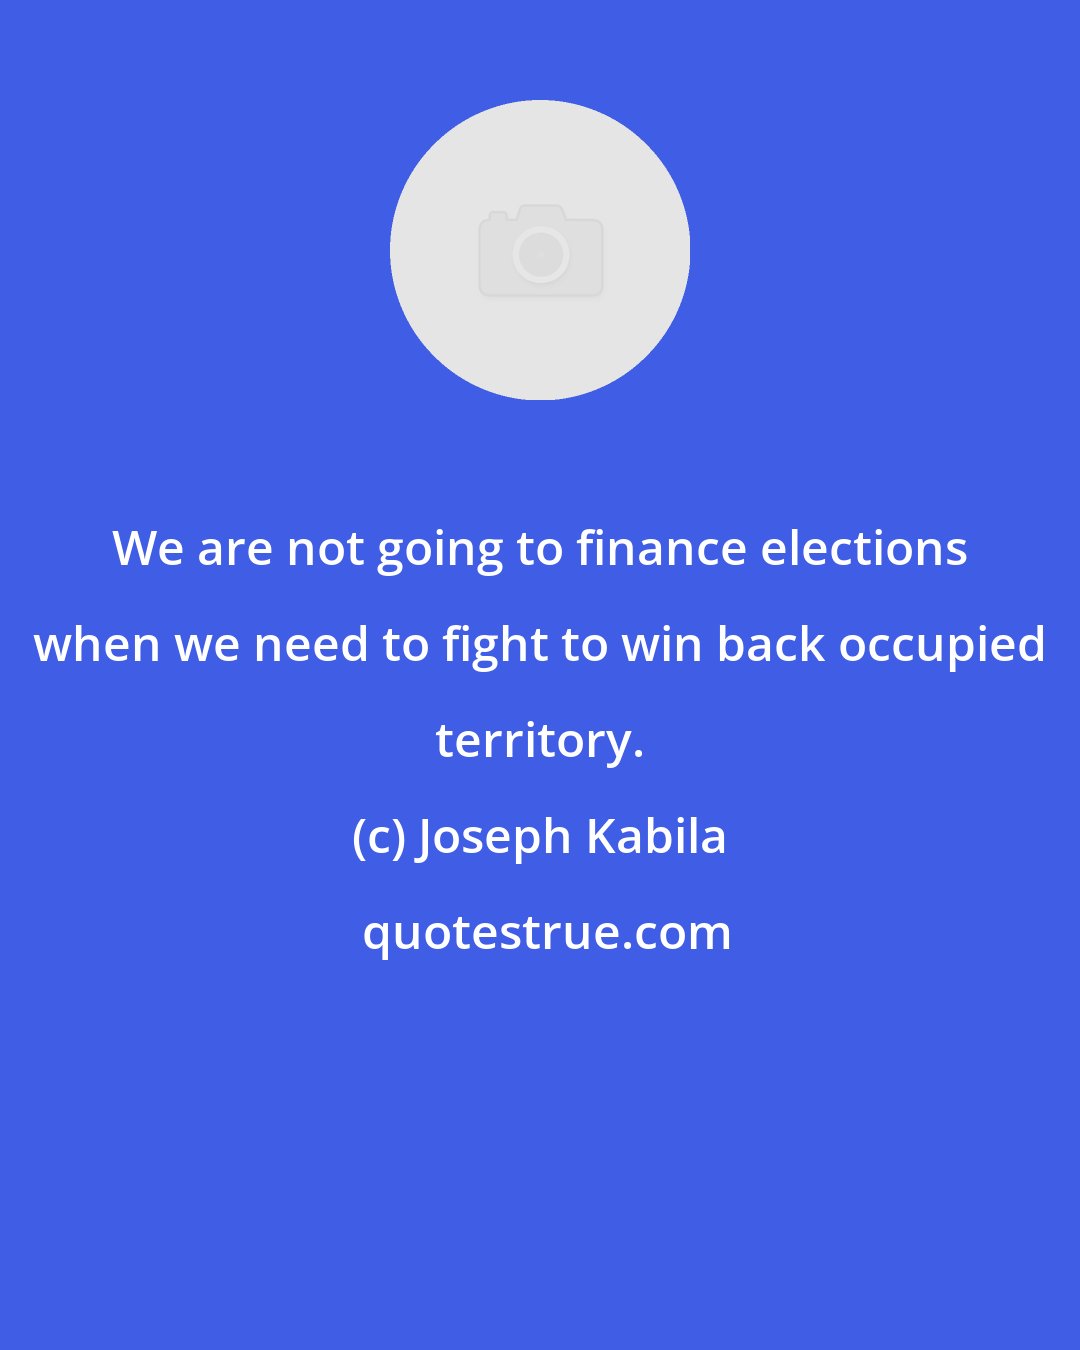 Joseph Kabila: We are not going to finance elections when we need to fight to win back occupied territory.